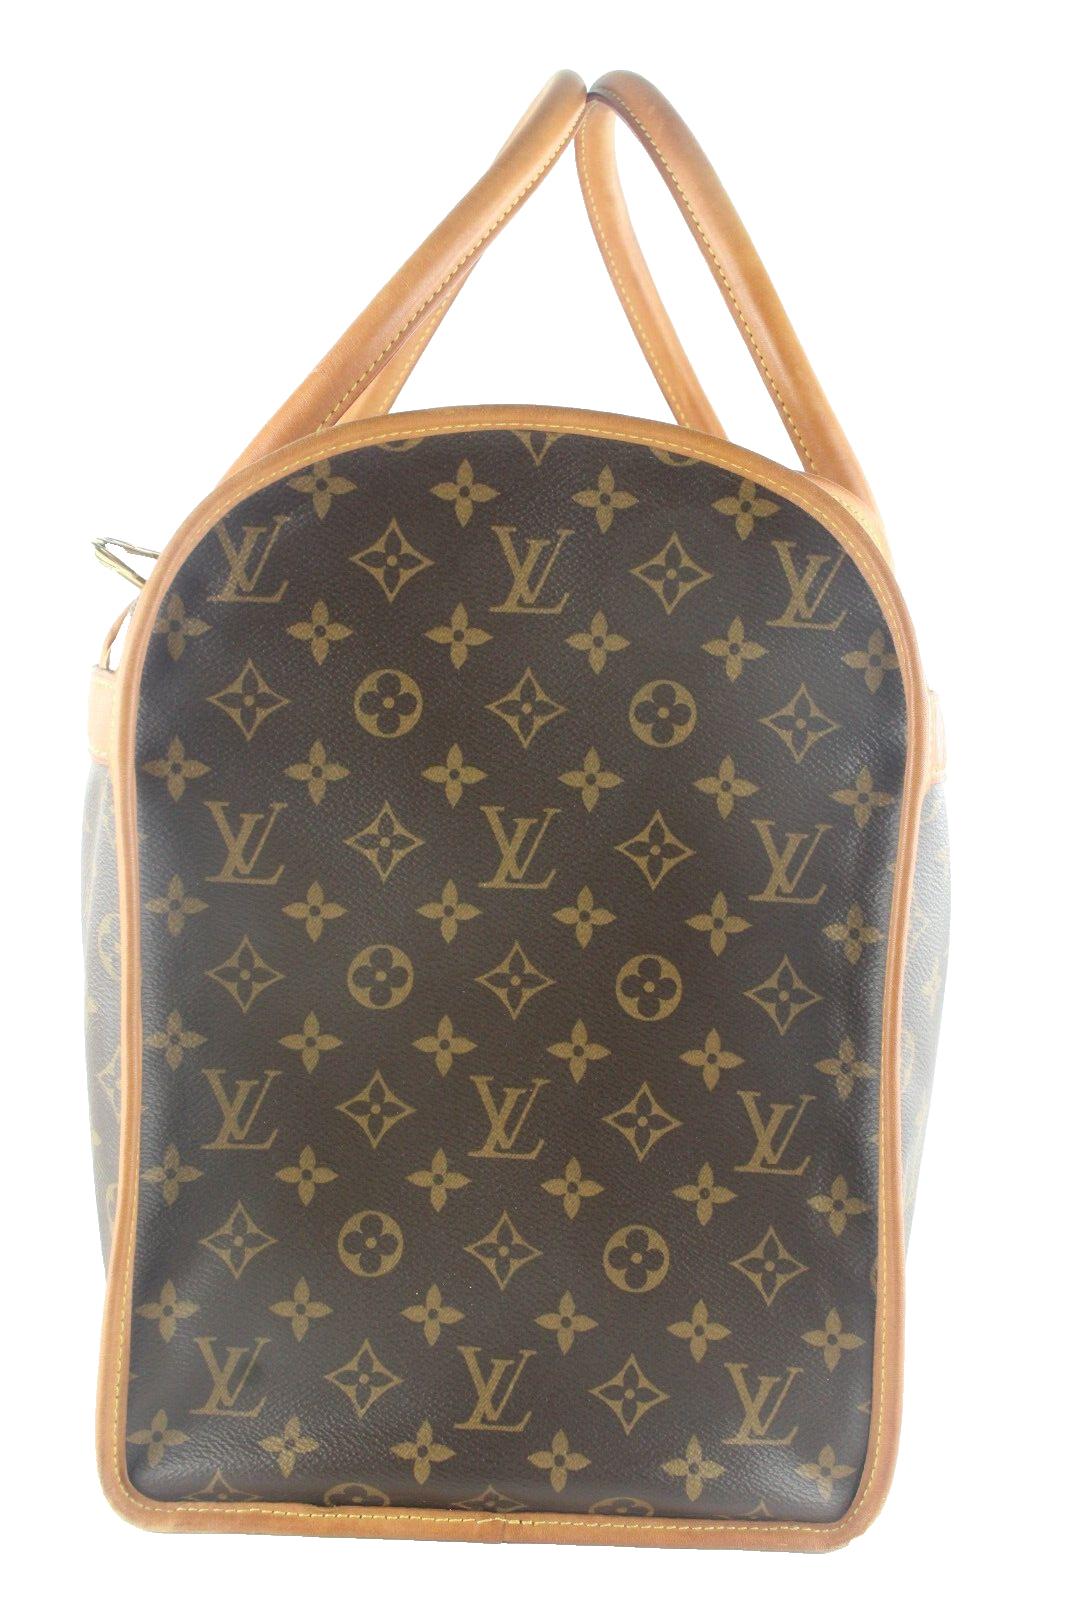 Louis Vuitton Sac Chien 50 Pet Carrier 6LV1025K In Good Condition For Sale In Dix hills, NY